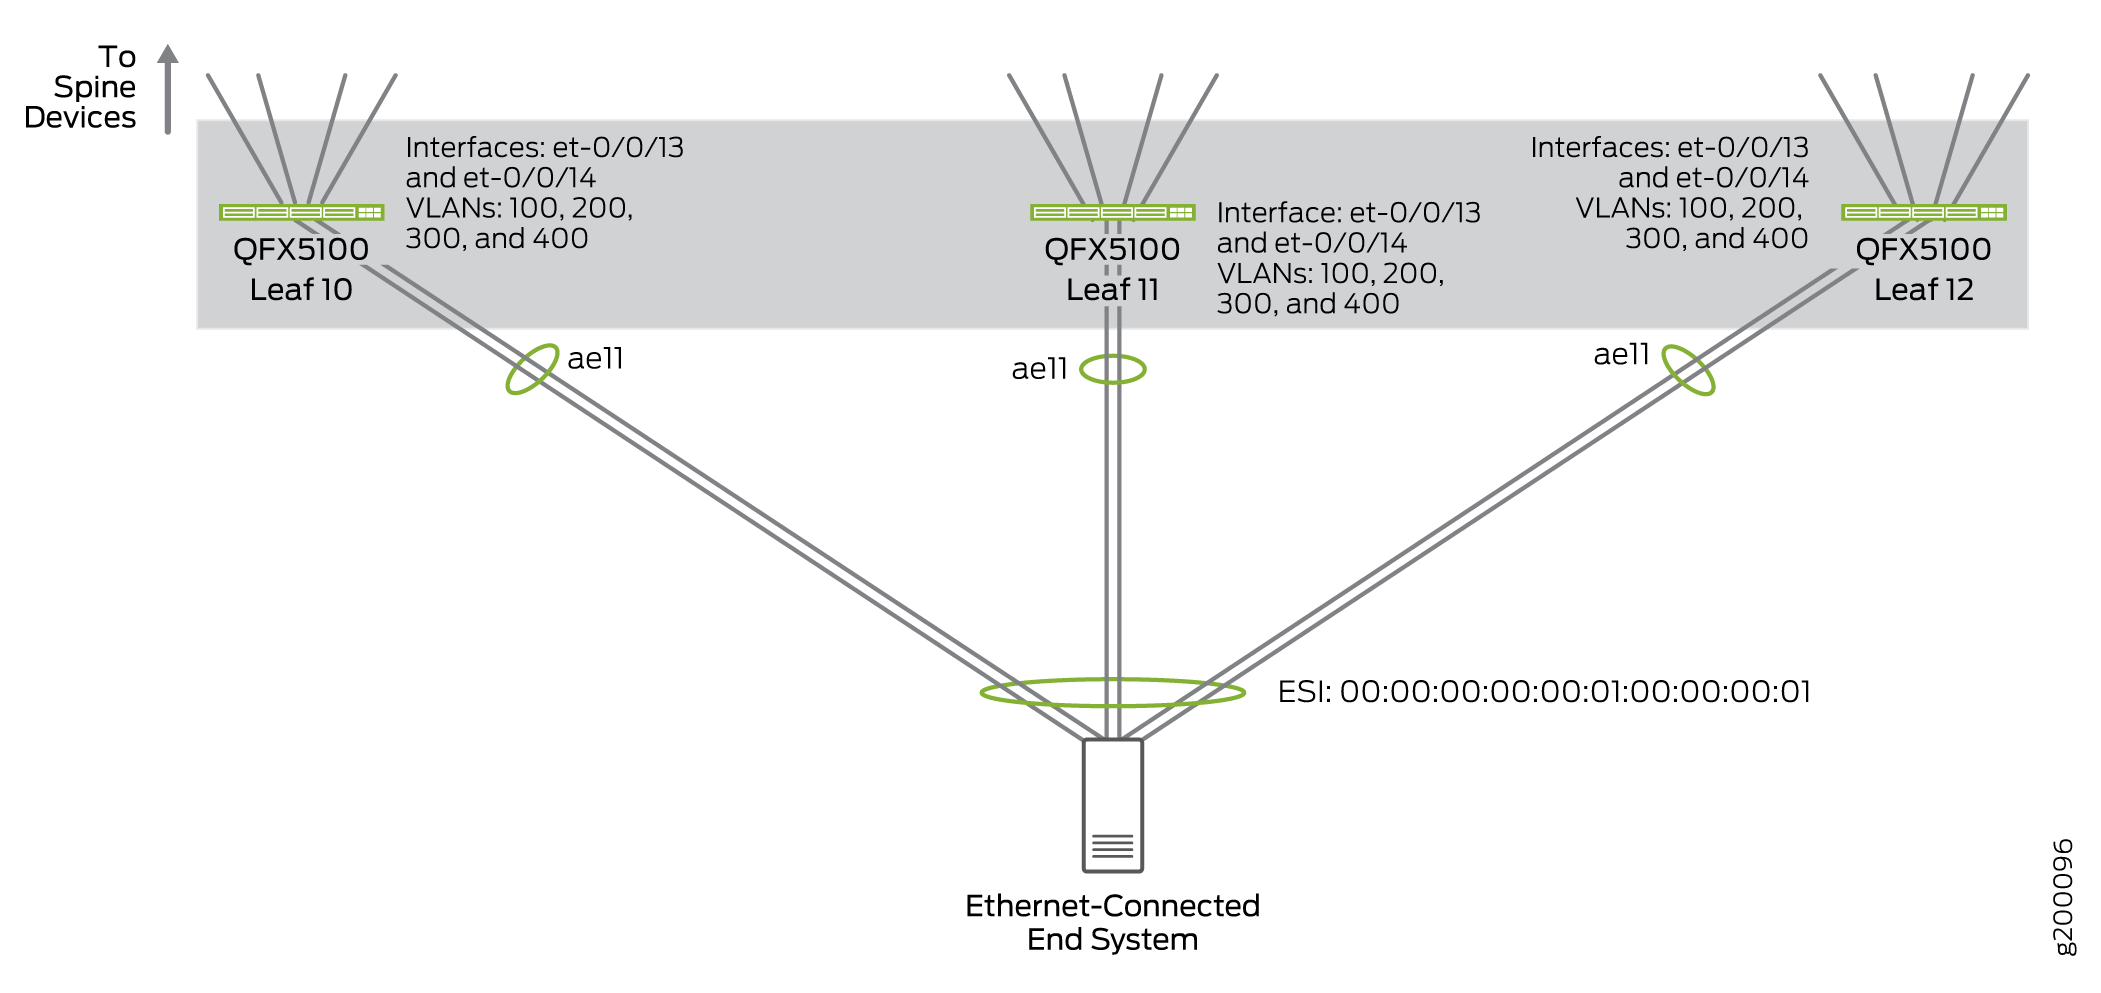 Ethernet-Connected Multihoming Example Overview